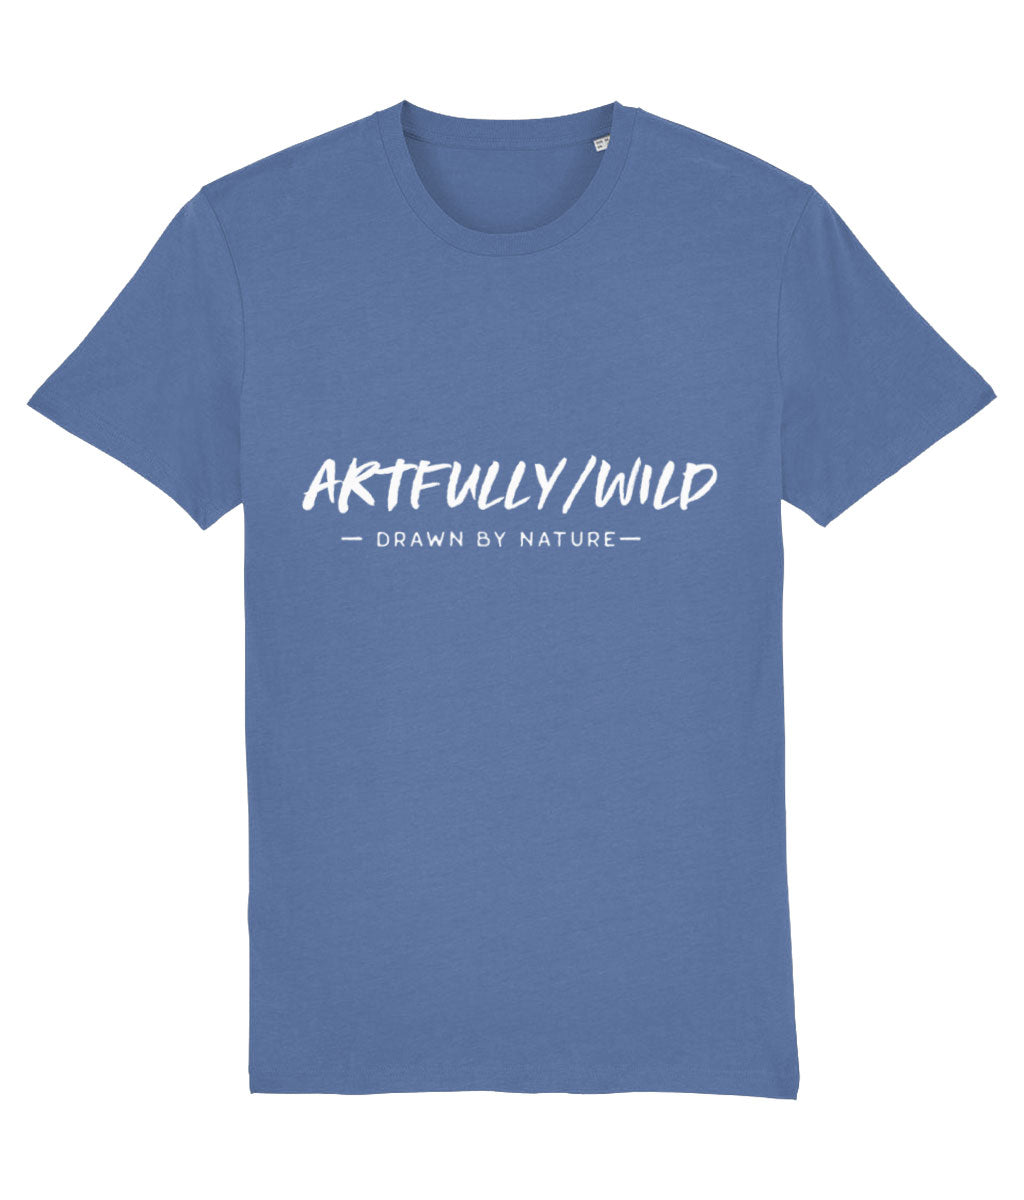 'ARTFULLY WILD. DRAWN BY NATURE' Printed Organic Cotton Bright Blue T-Shirt. Unisex/Men/Women. Printed with eco-friendly water-based Inks. Ethical Clothing by Artfully/Wild.